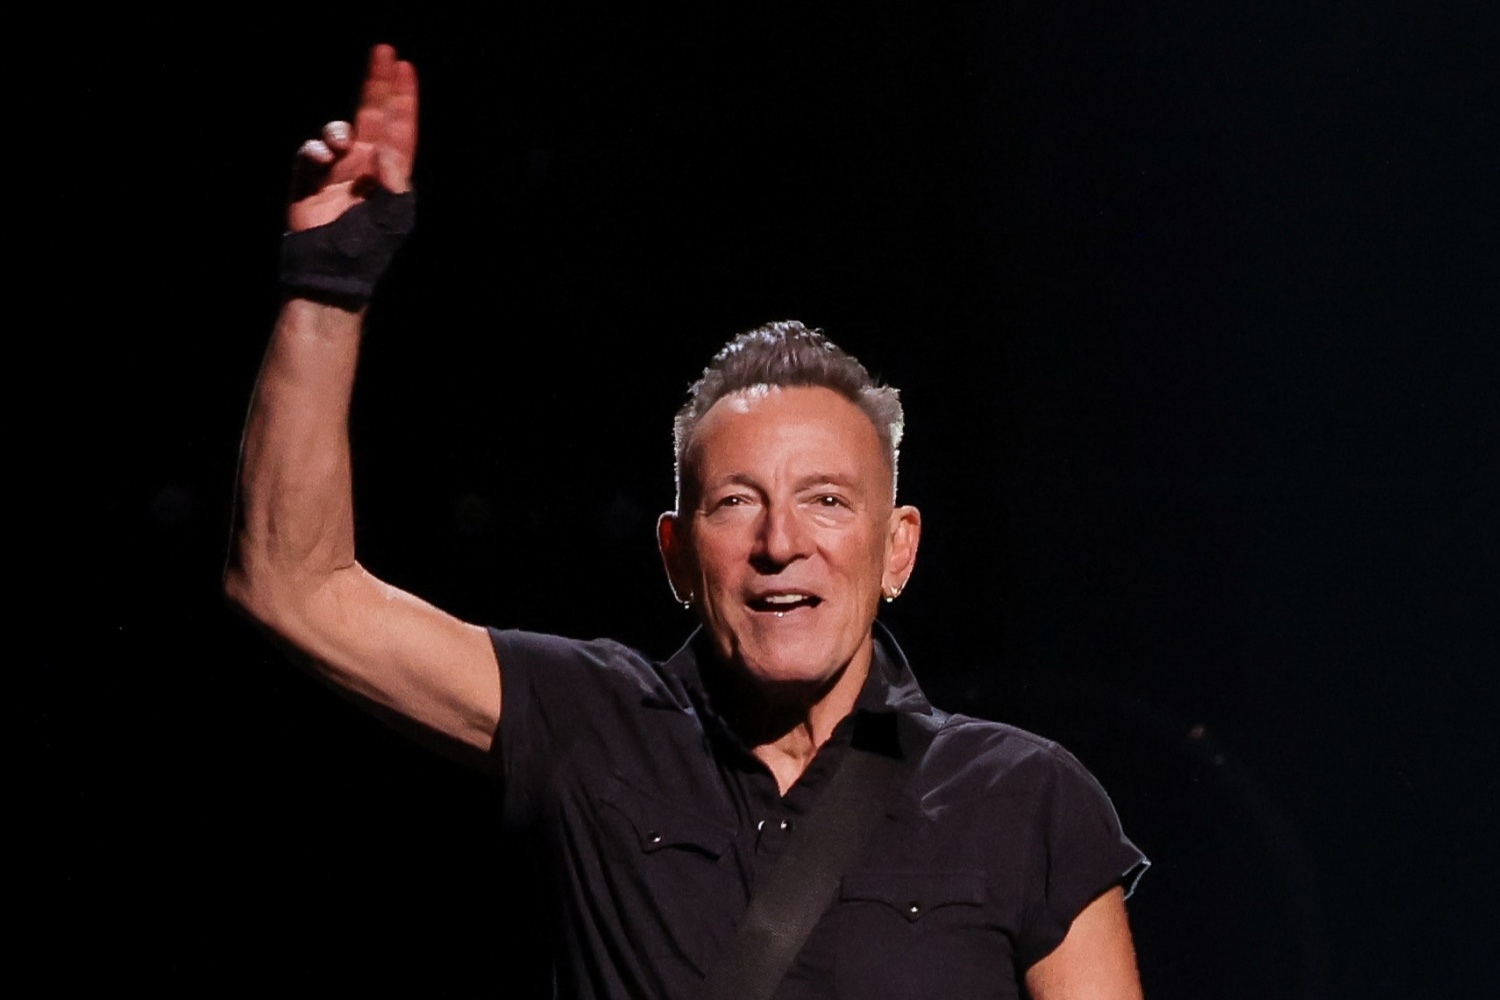 Bruce Springsteen Recalls The Time He 'Couldn't Sing' Because of Peptic Ulcer